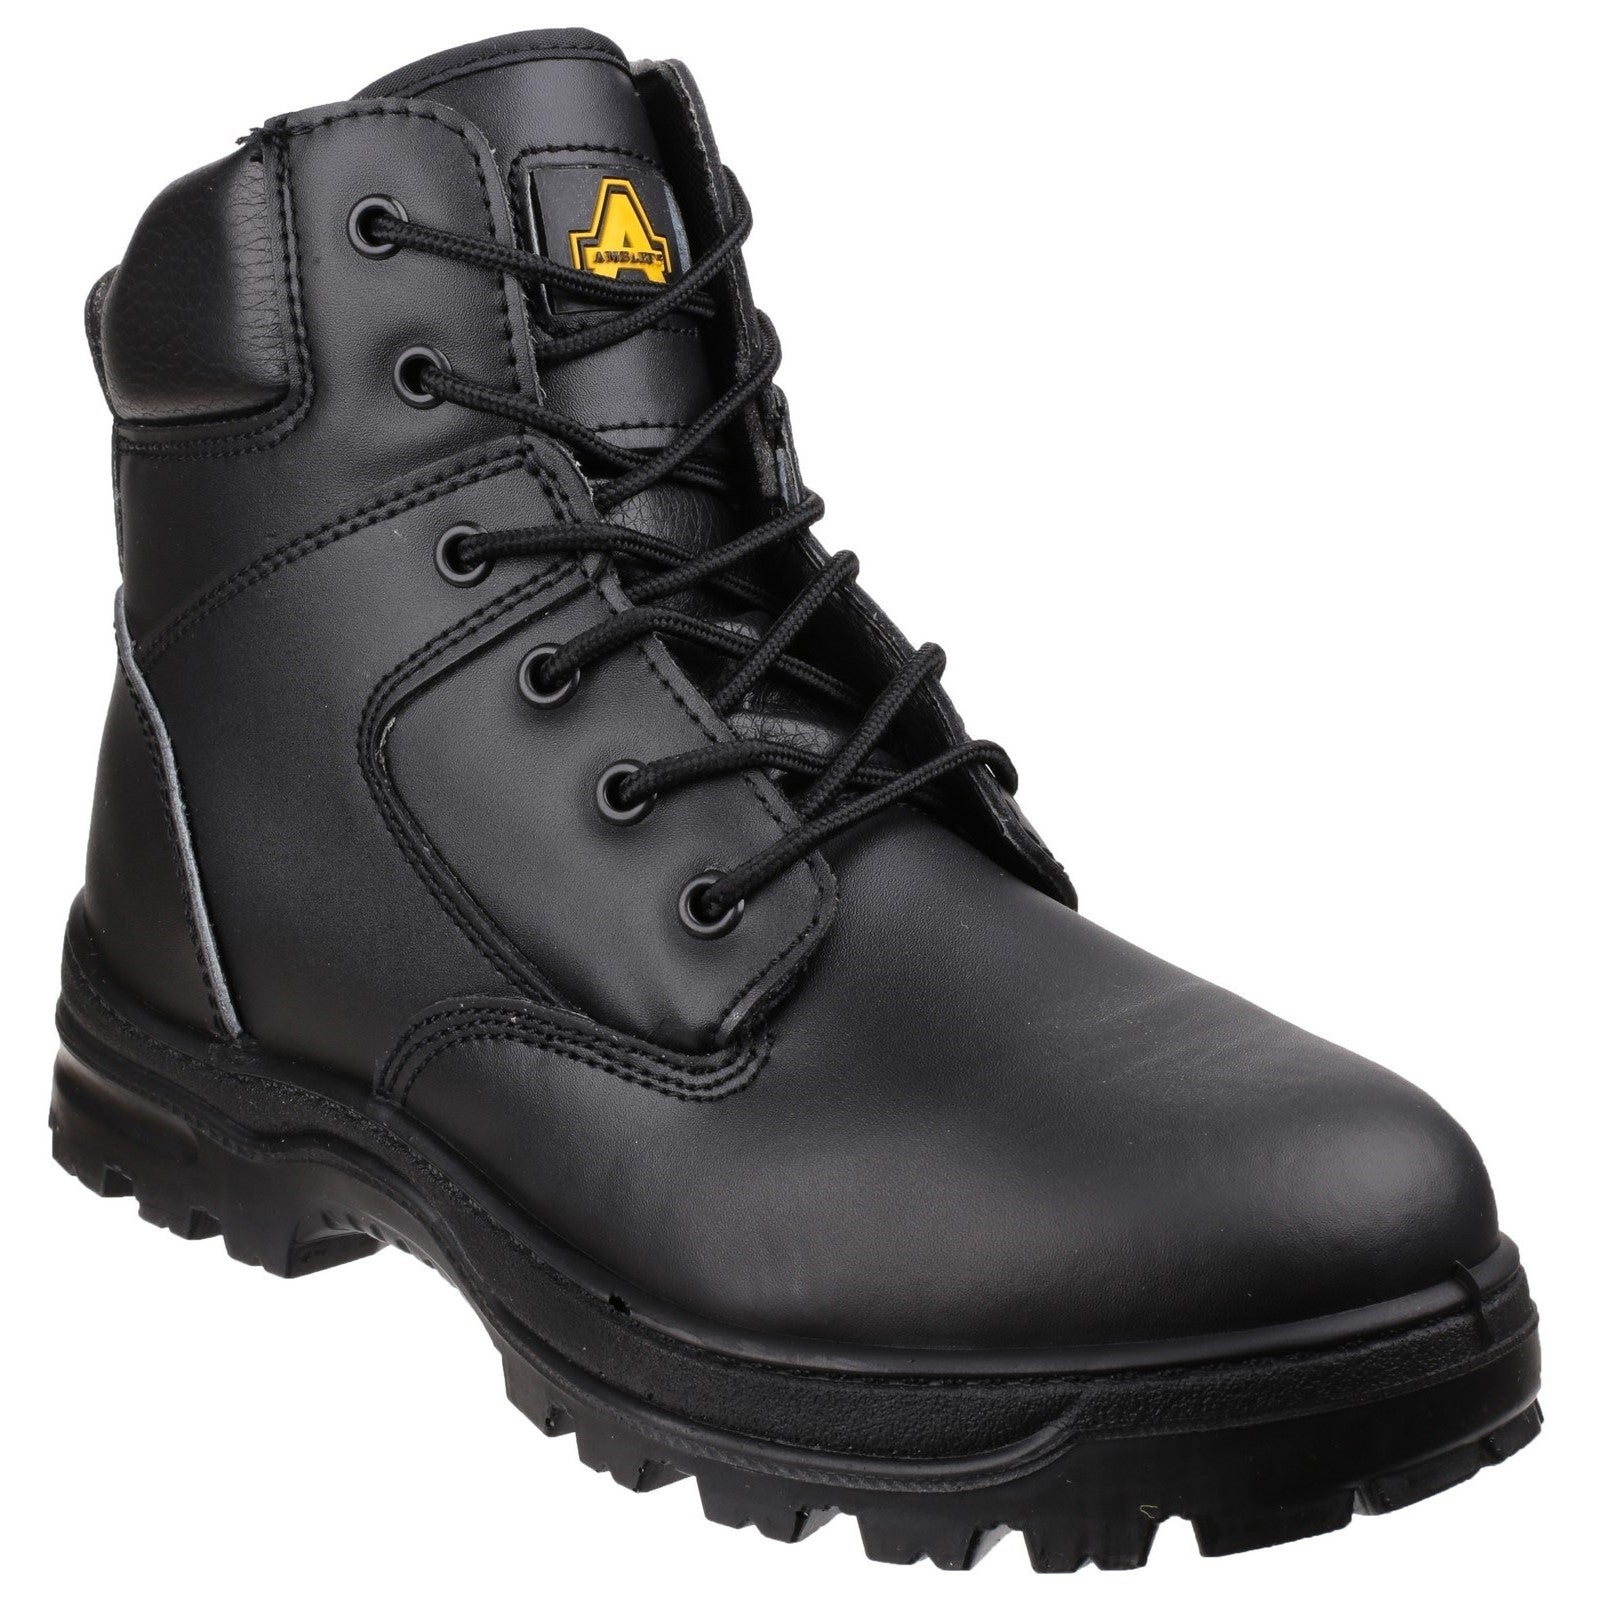 FS84 Antistatic Lace up Safety Boot, Amblers Safety